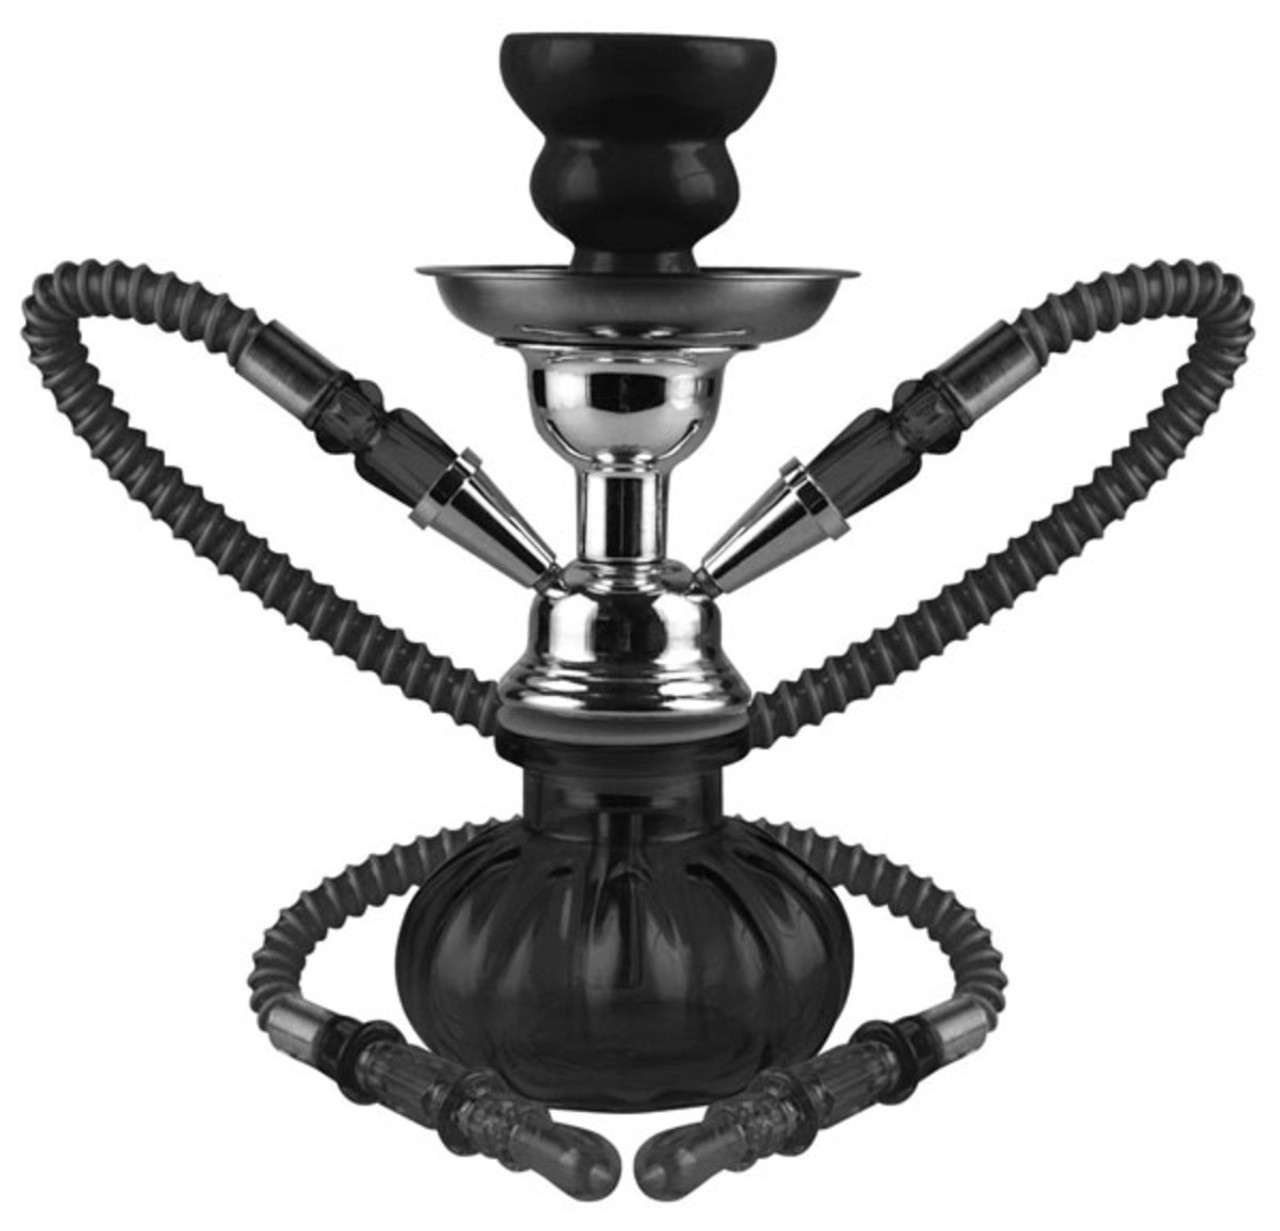 Double Hose Hookah Pipe 10 inch with box - Buitrago Cigars